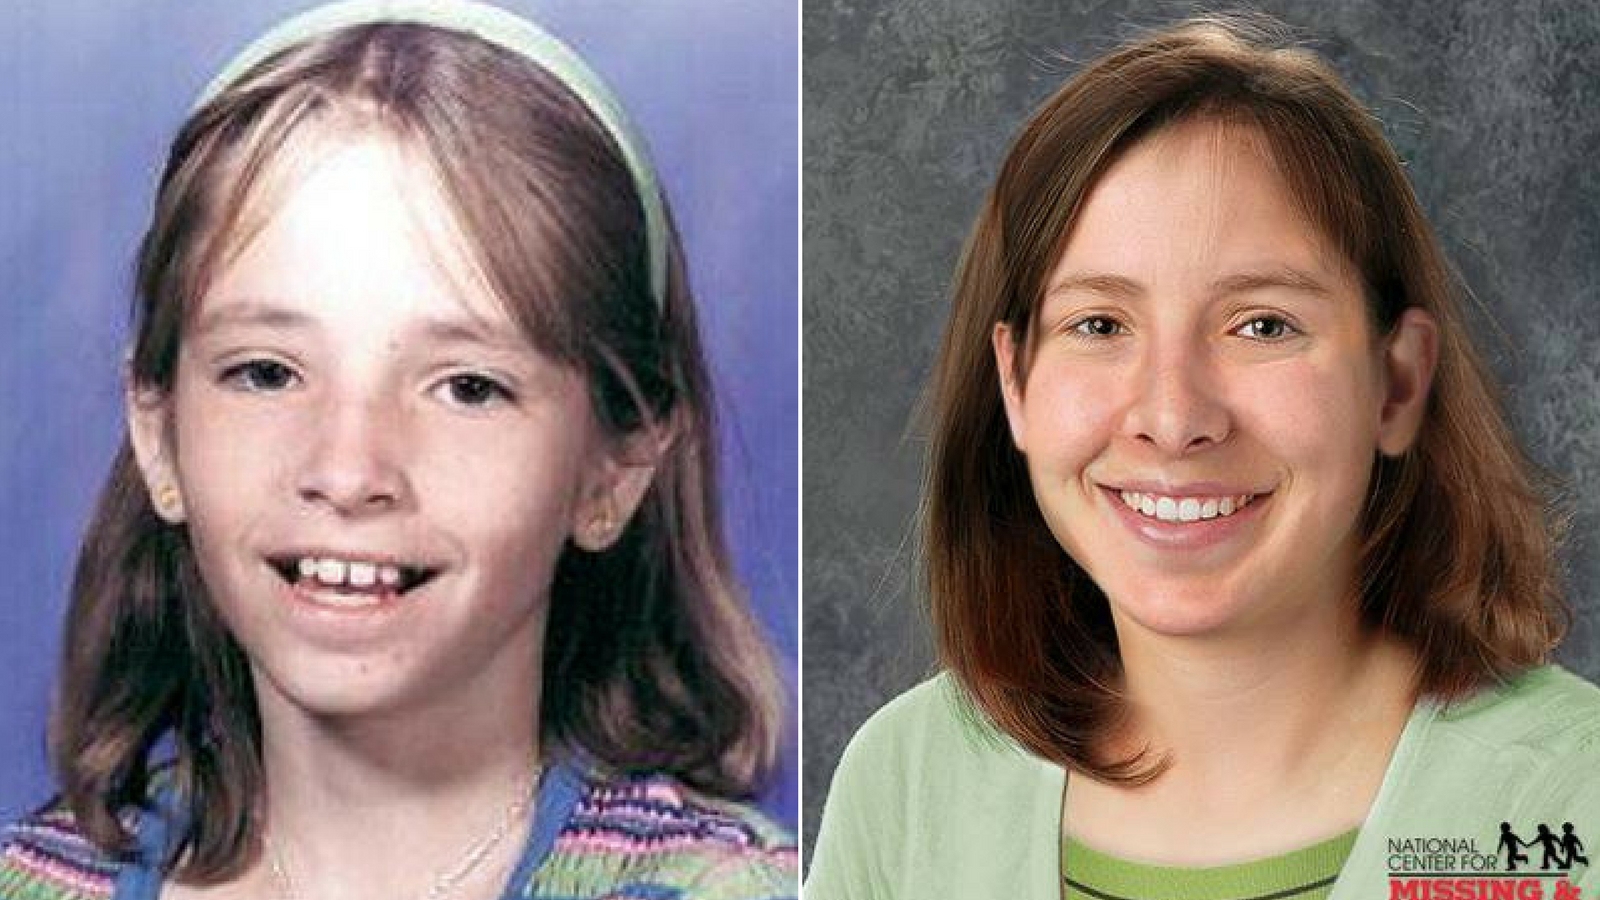 Mesa police release photo of what missing girl Mikelle Biggs may look